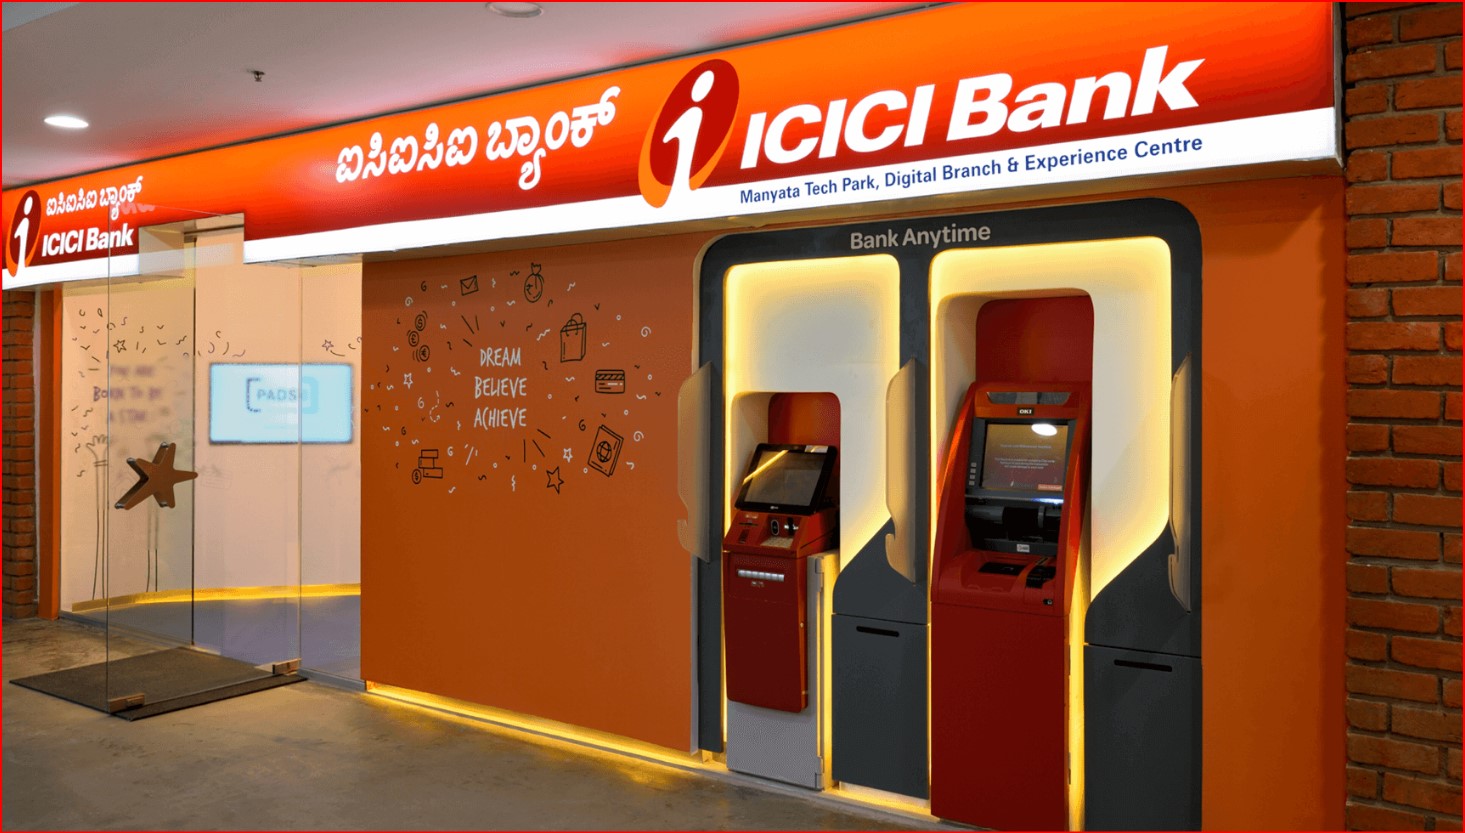 Icici Bank Atm Space Rental Online Application Form And Contact Information Delhi Capital 7845